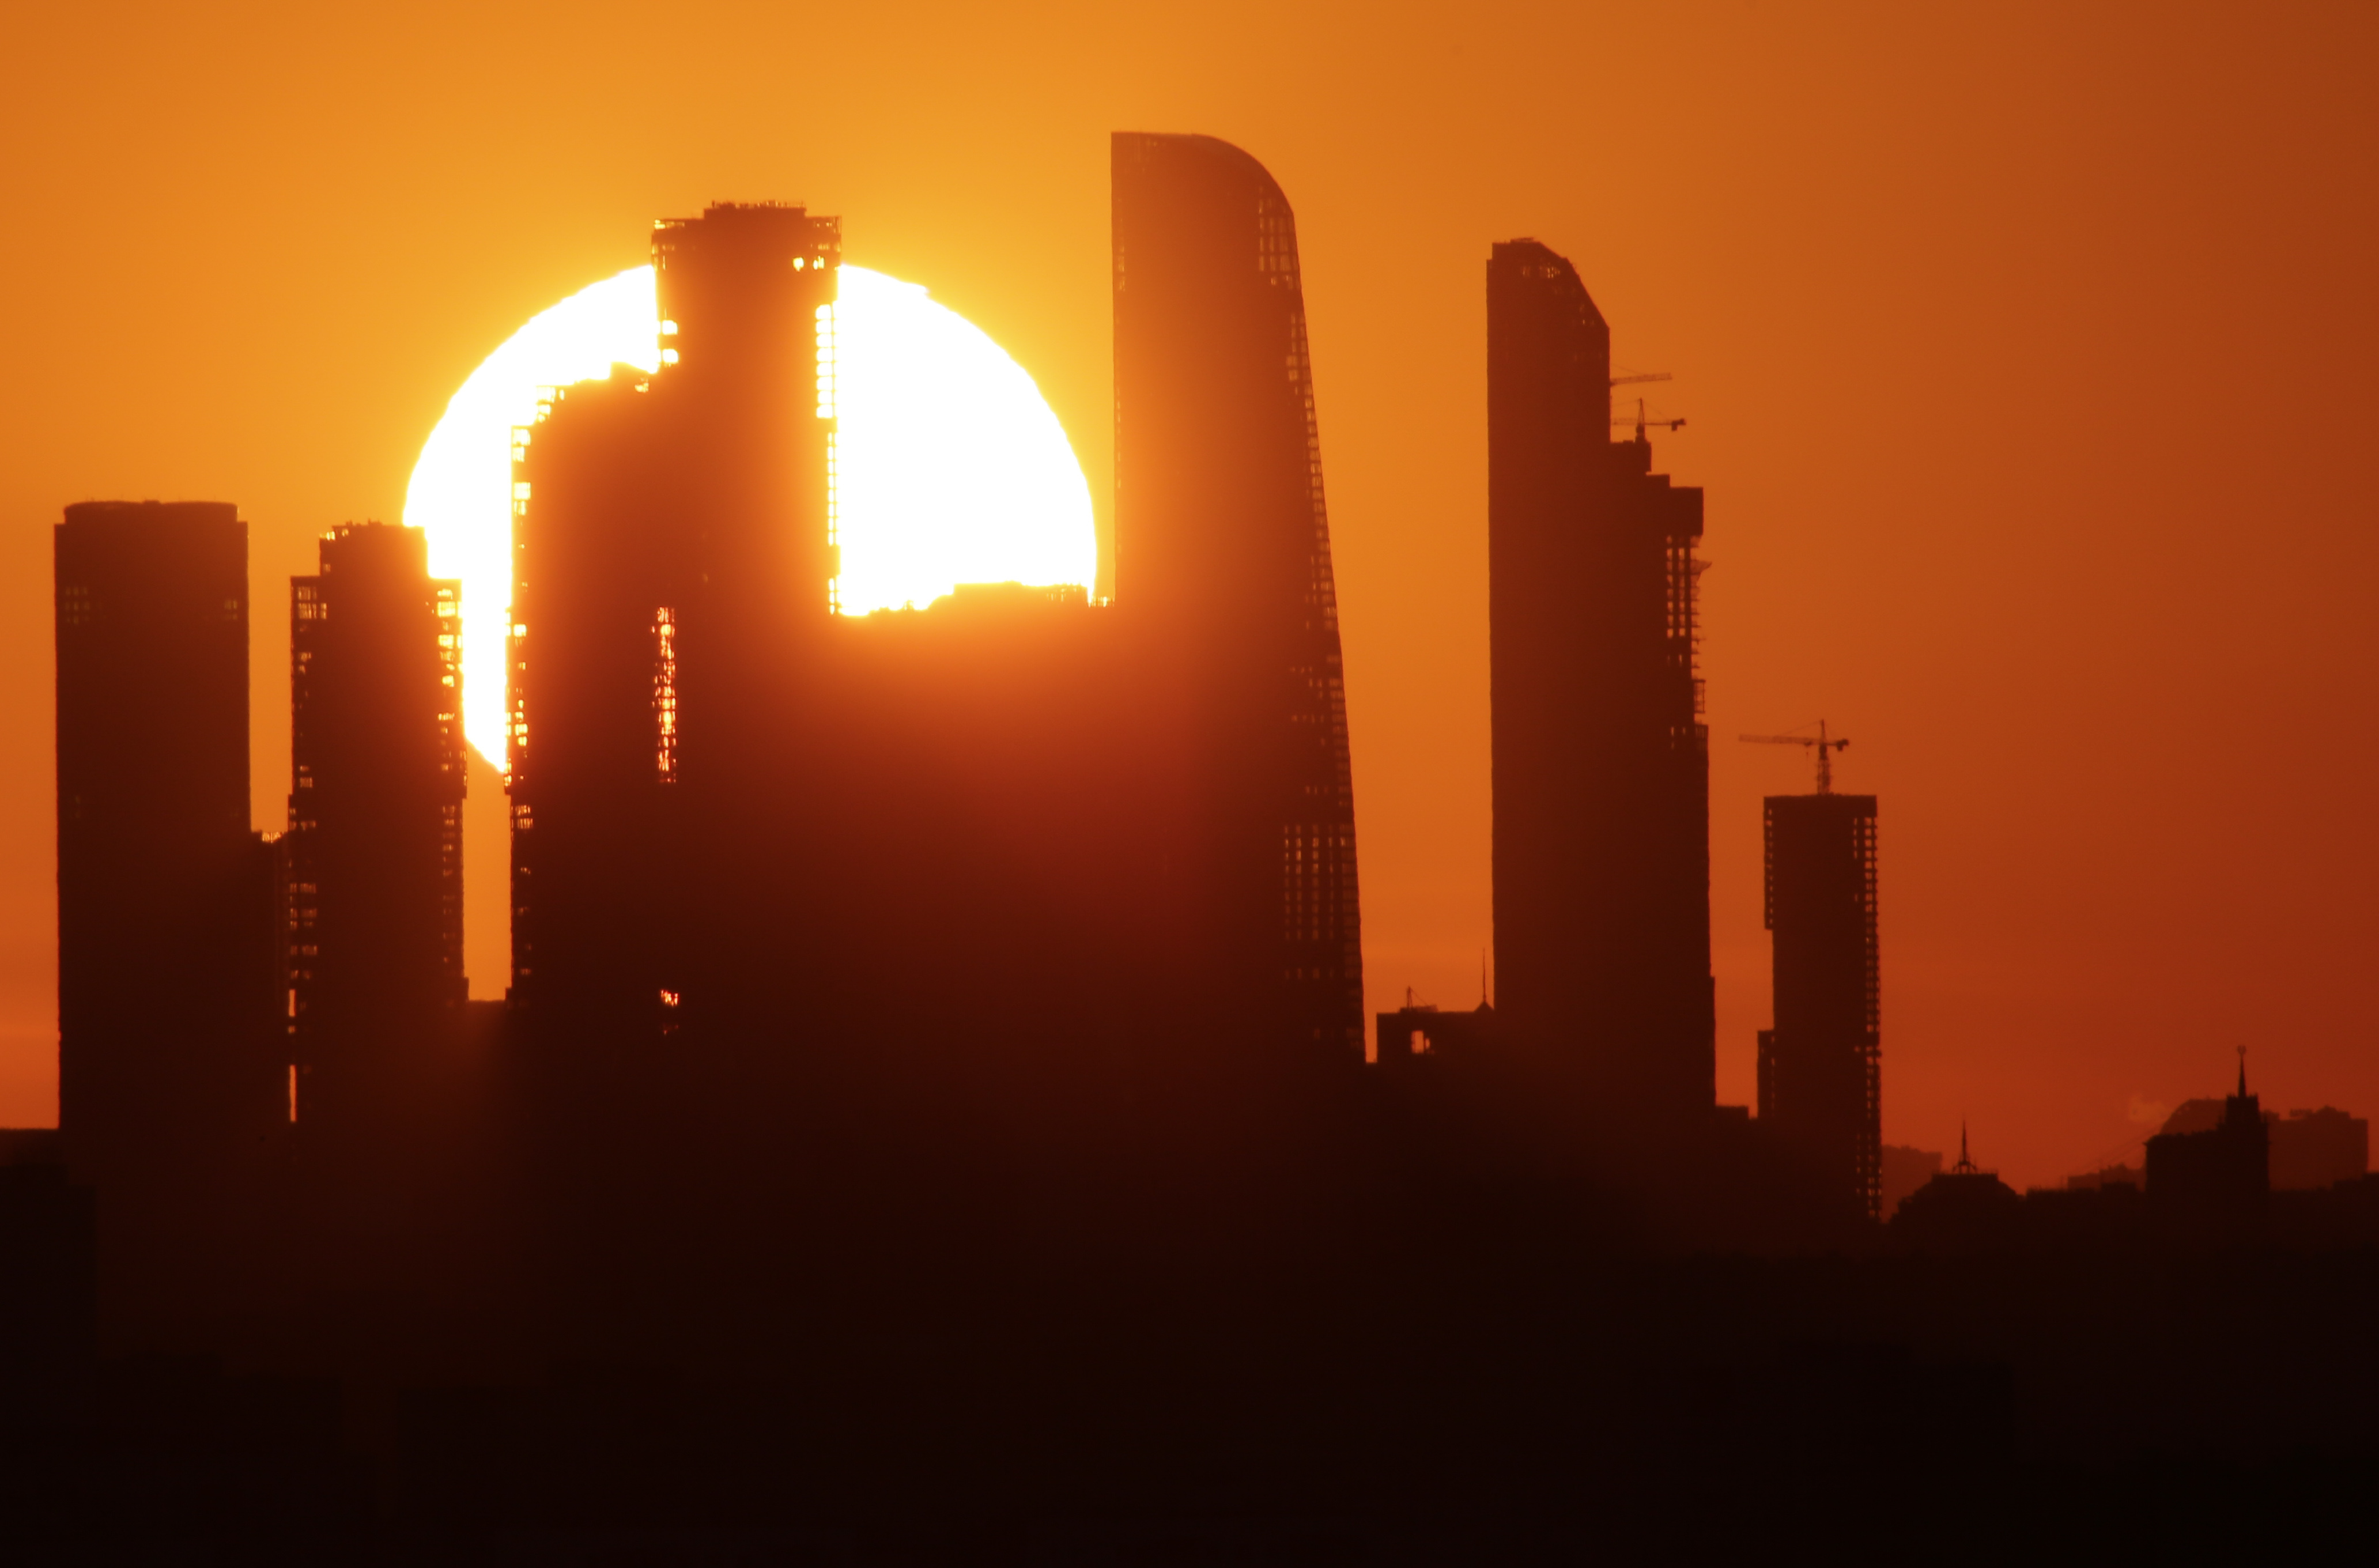 The sun sets behind the skyscrapers of the Moscow International Business Centre in Moscow